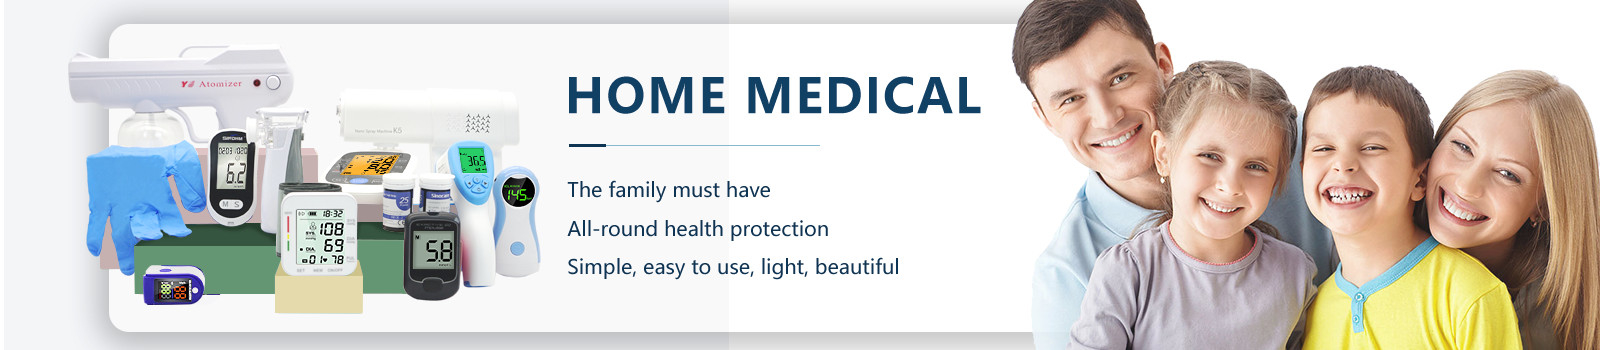 Home Medical Devices